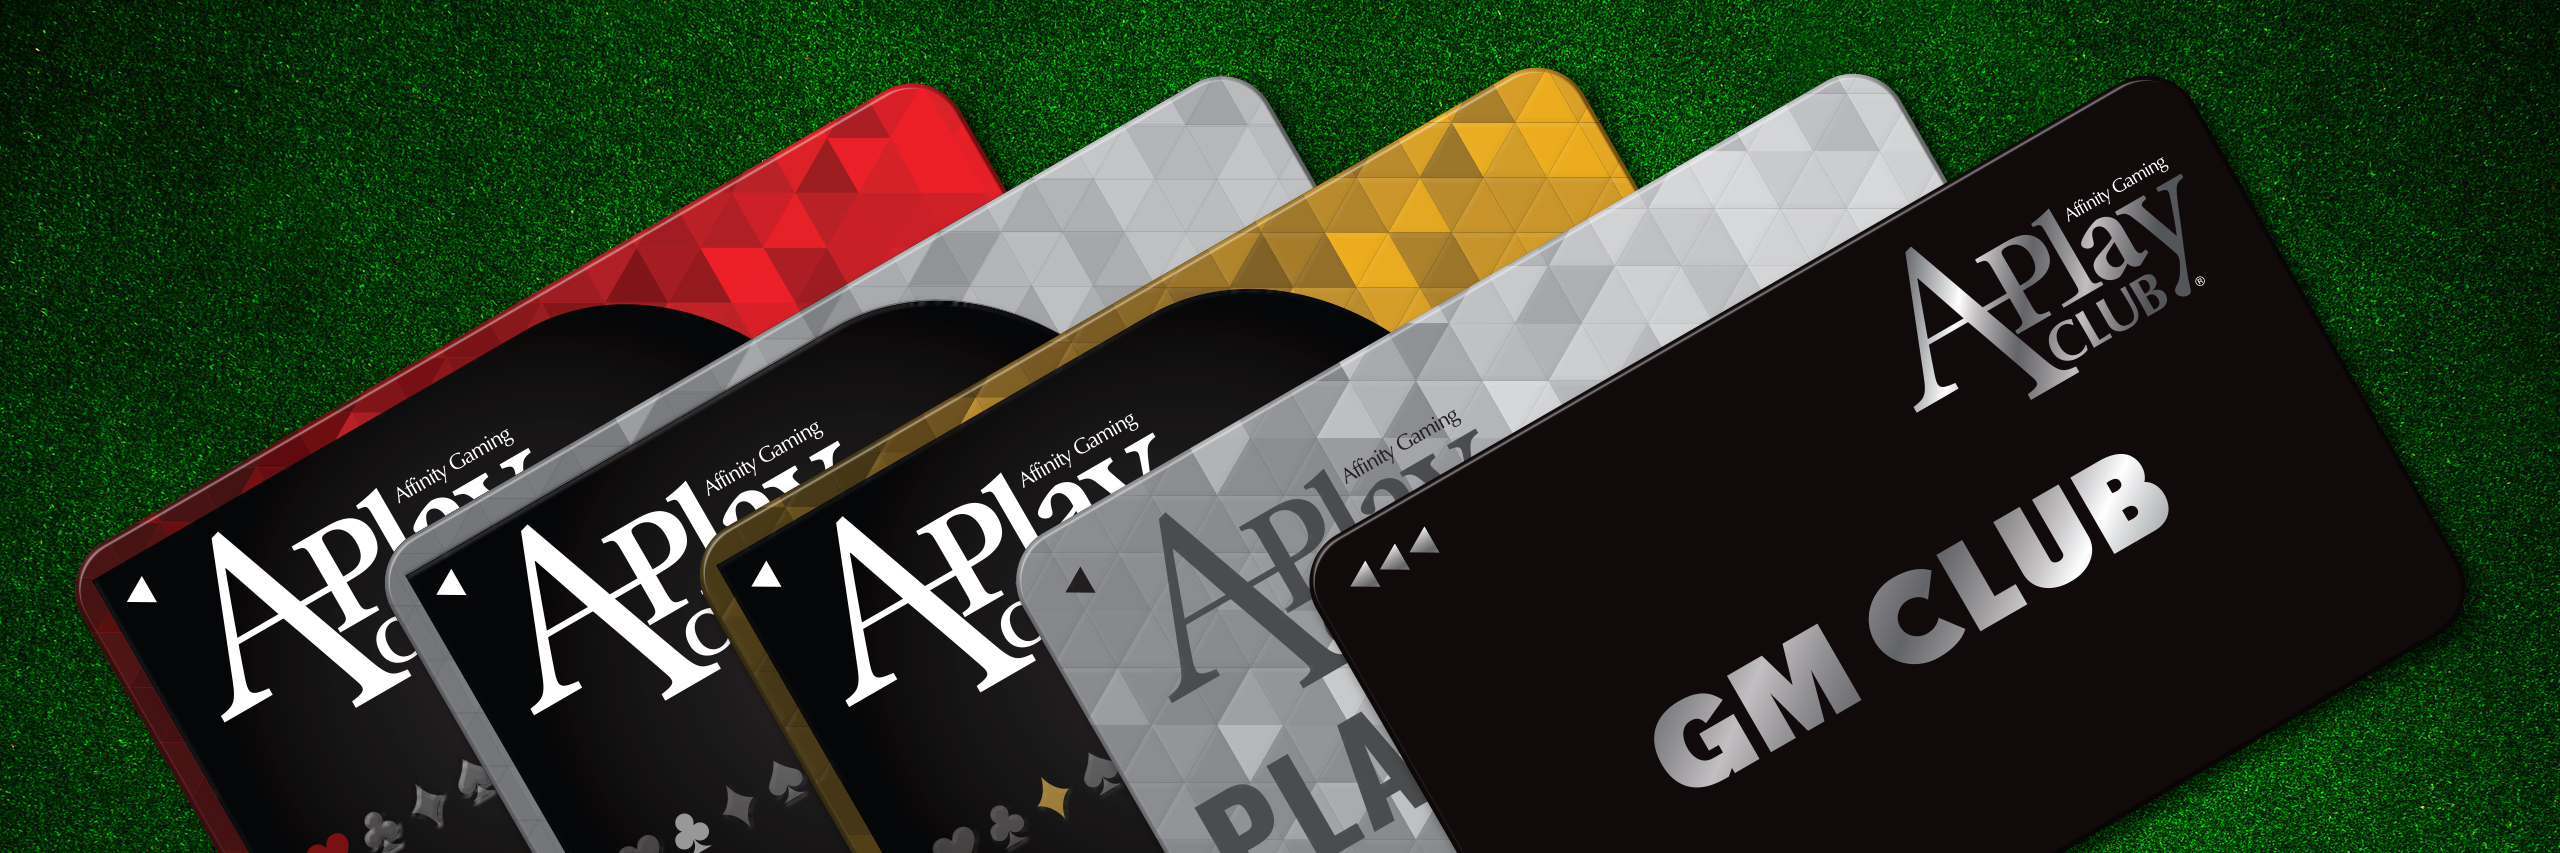 A-Play Cards Banner